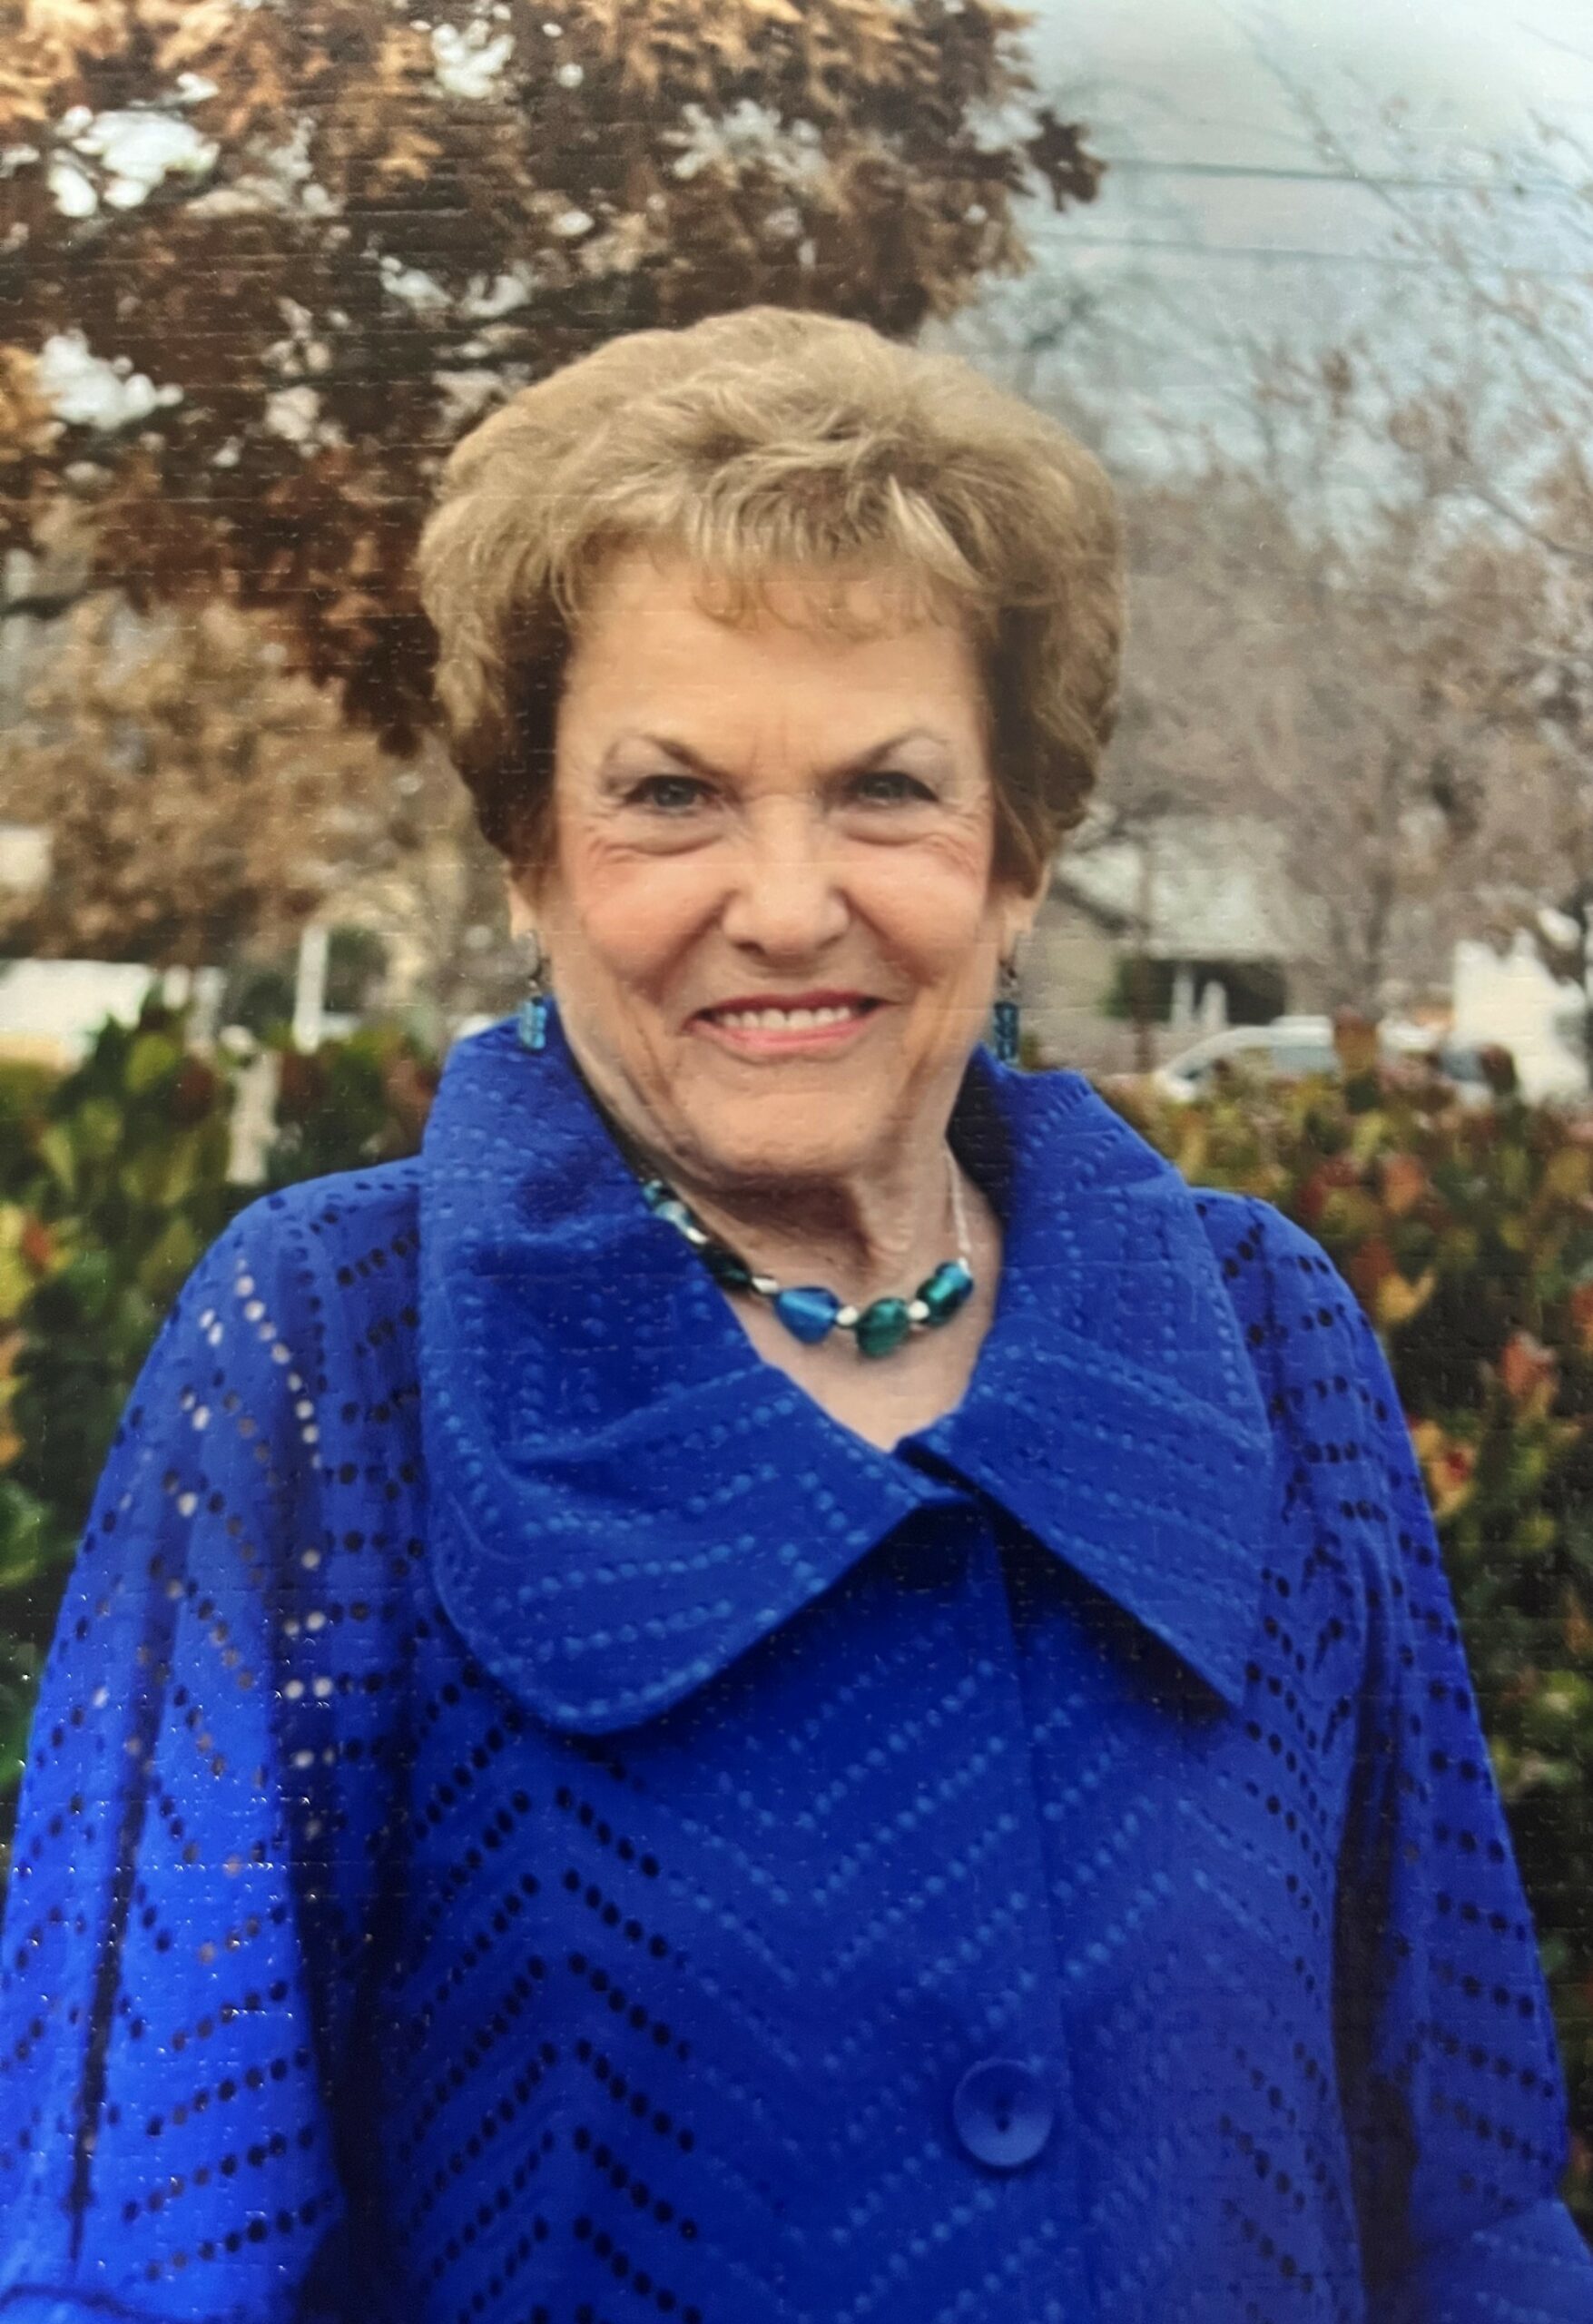 Obituary for Nell Crowson